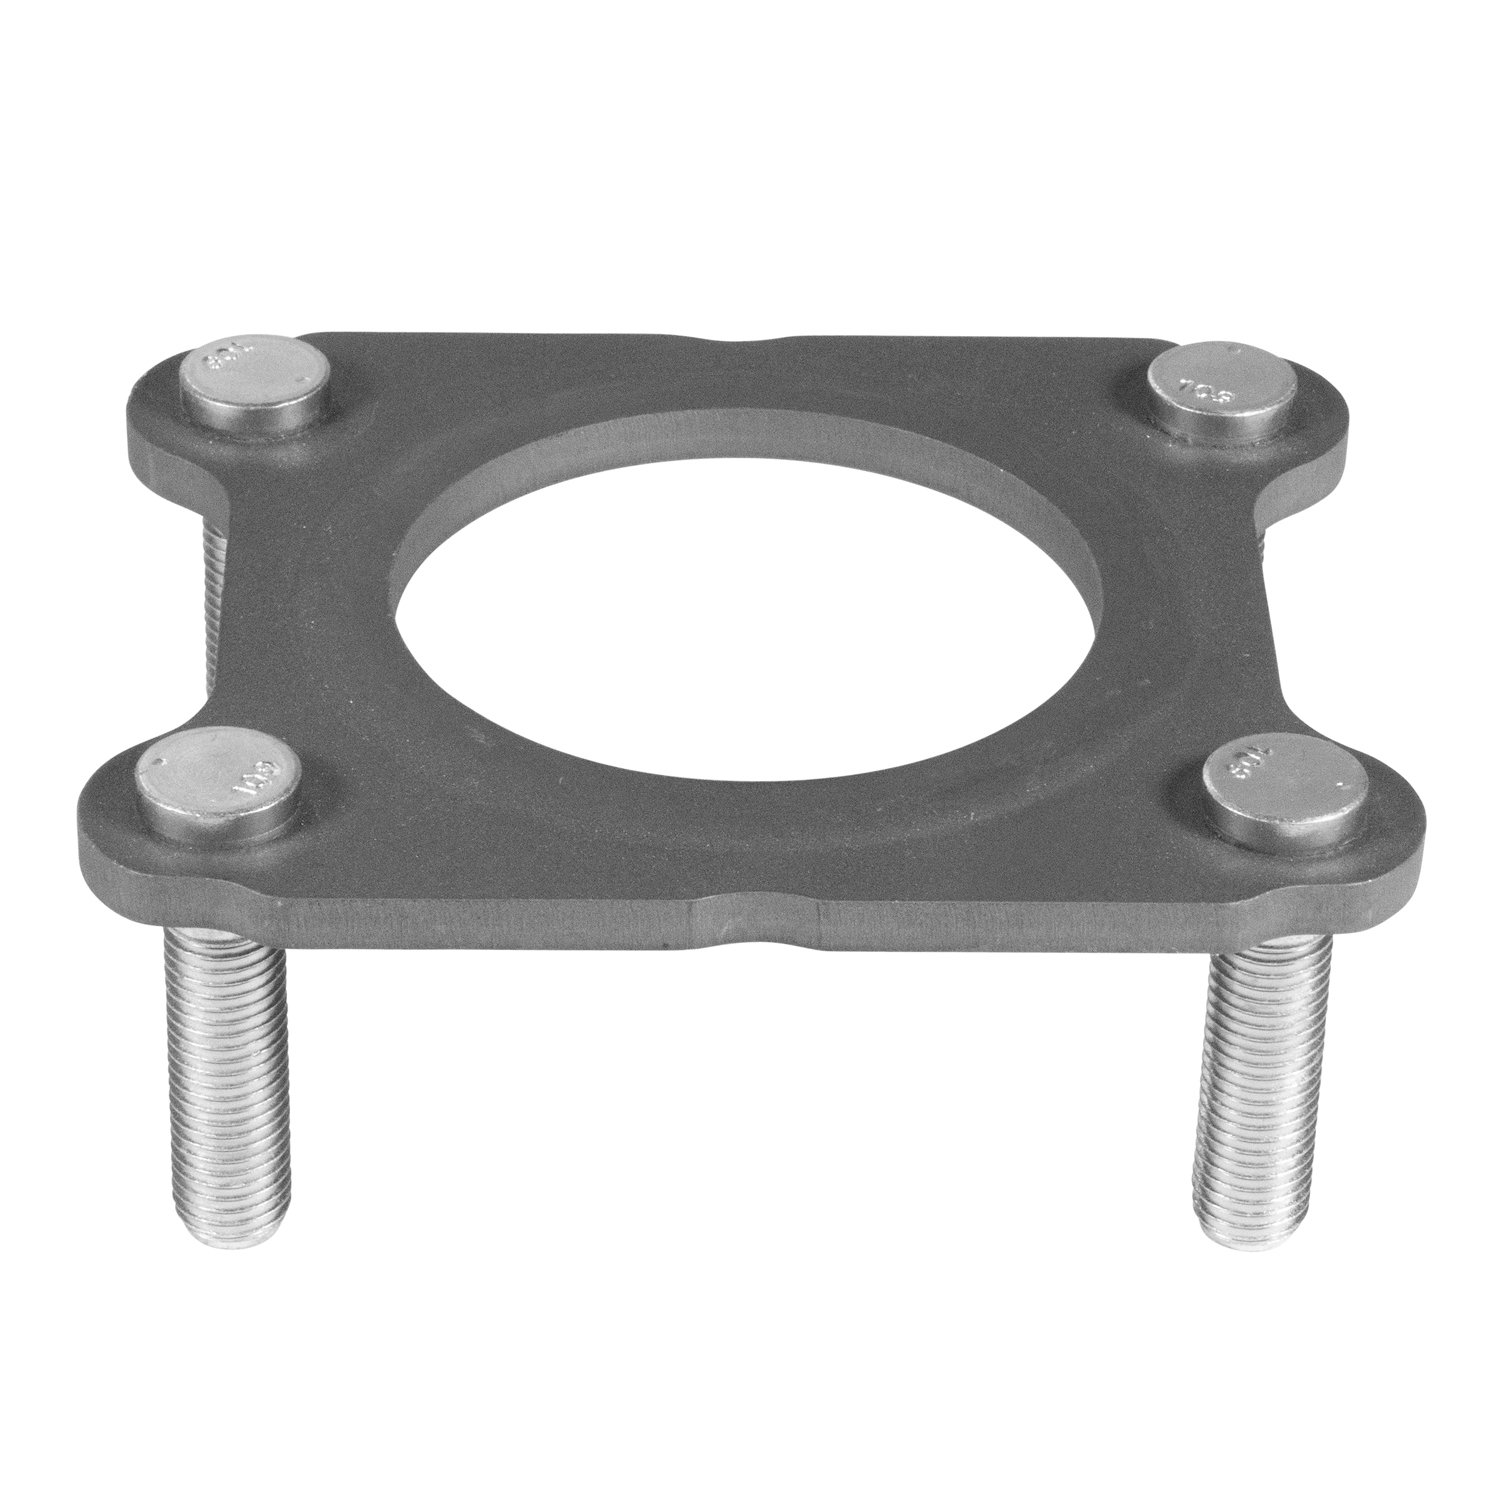 Bearing Retainer For Jeep Jl Rubicon Dana 44 Rear Axle, With Studs